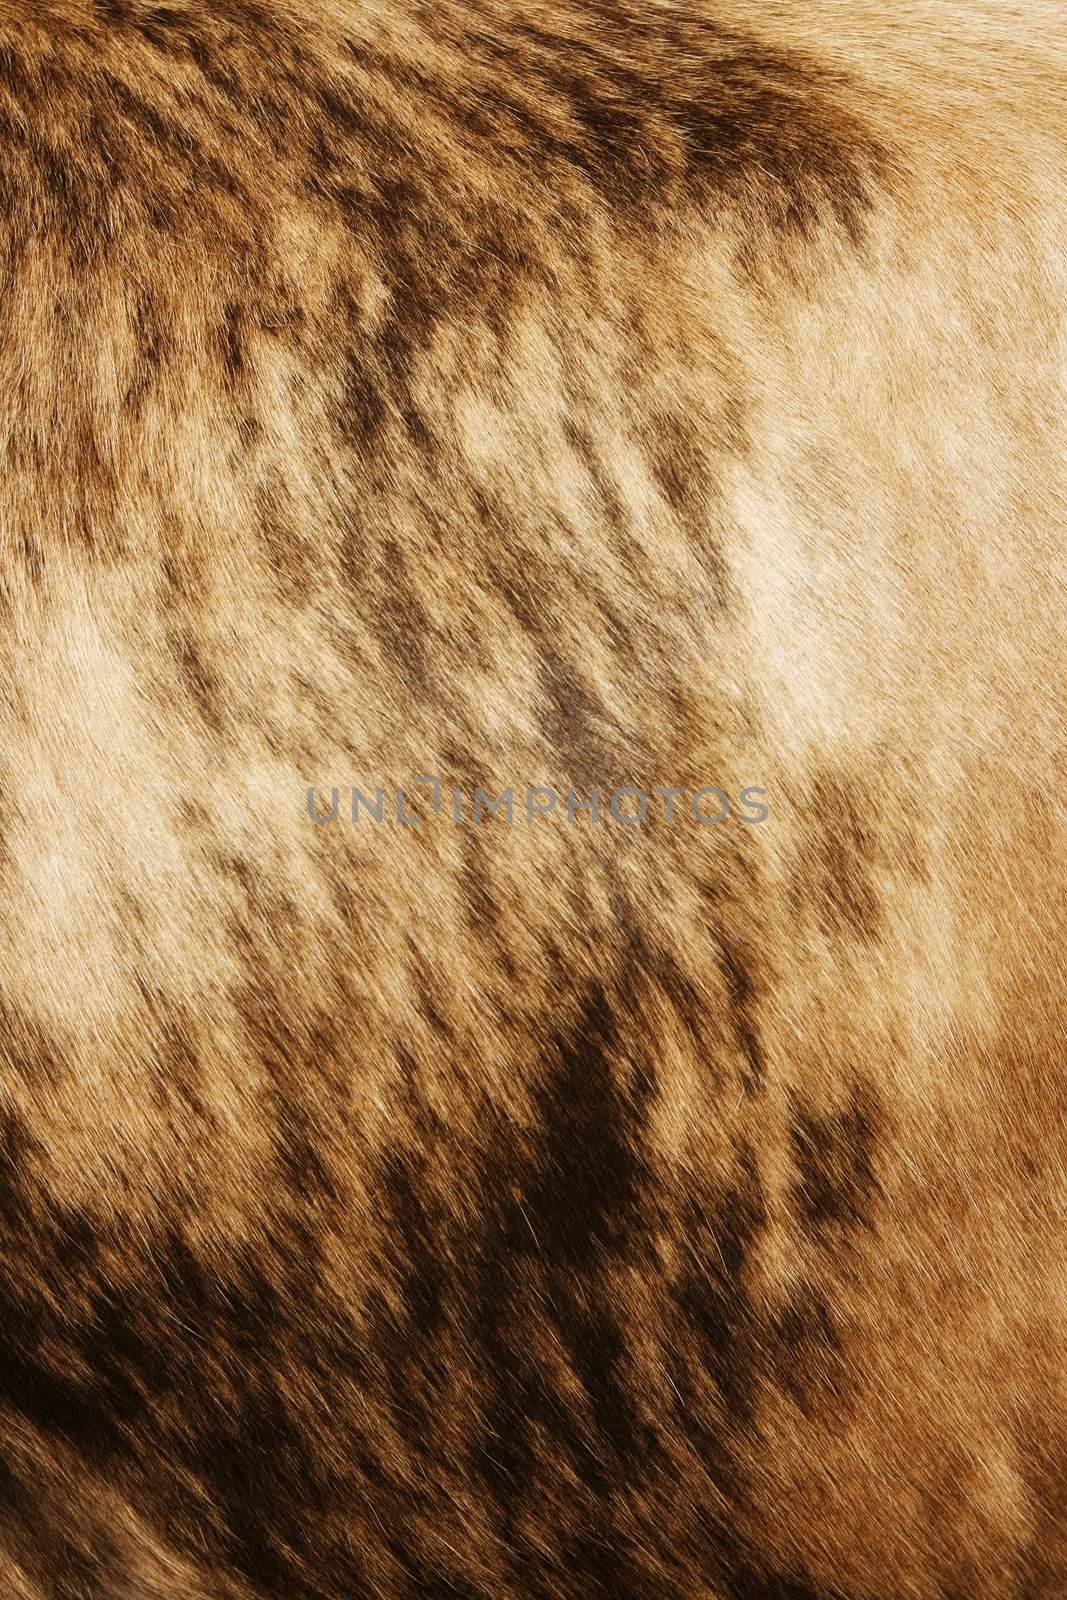 Natural cow hide background with striped texture